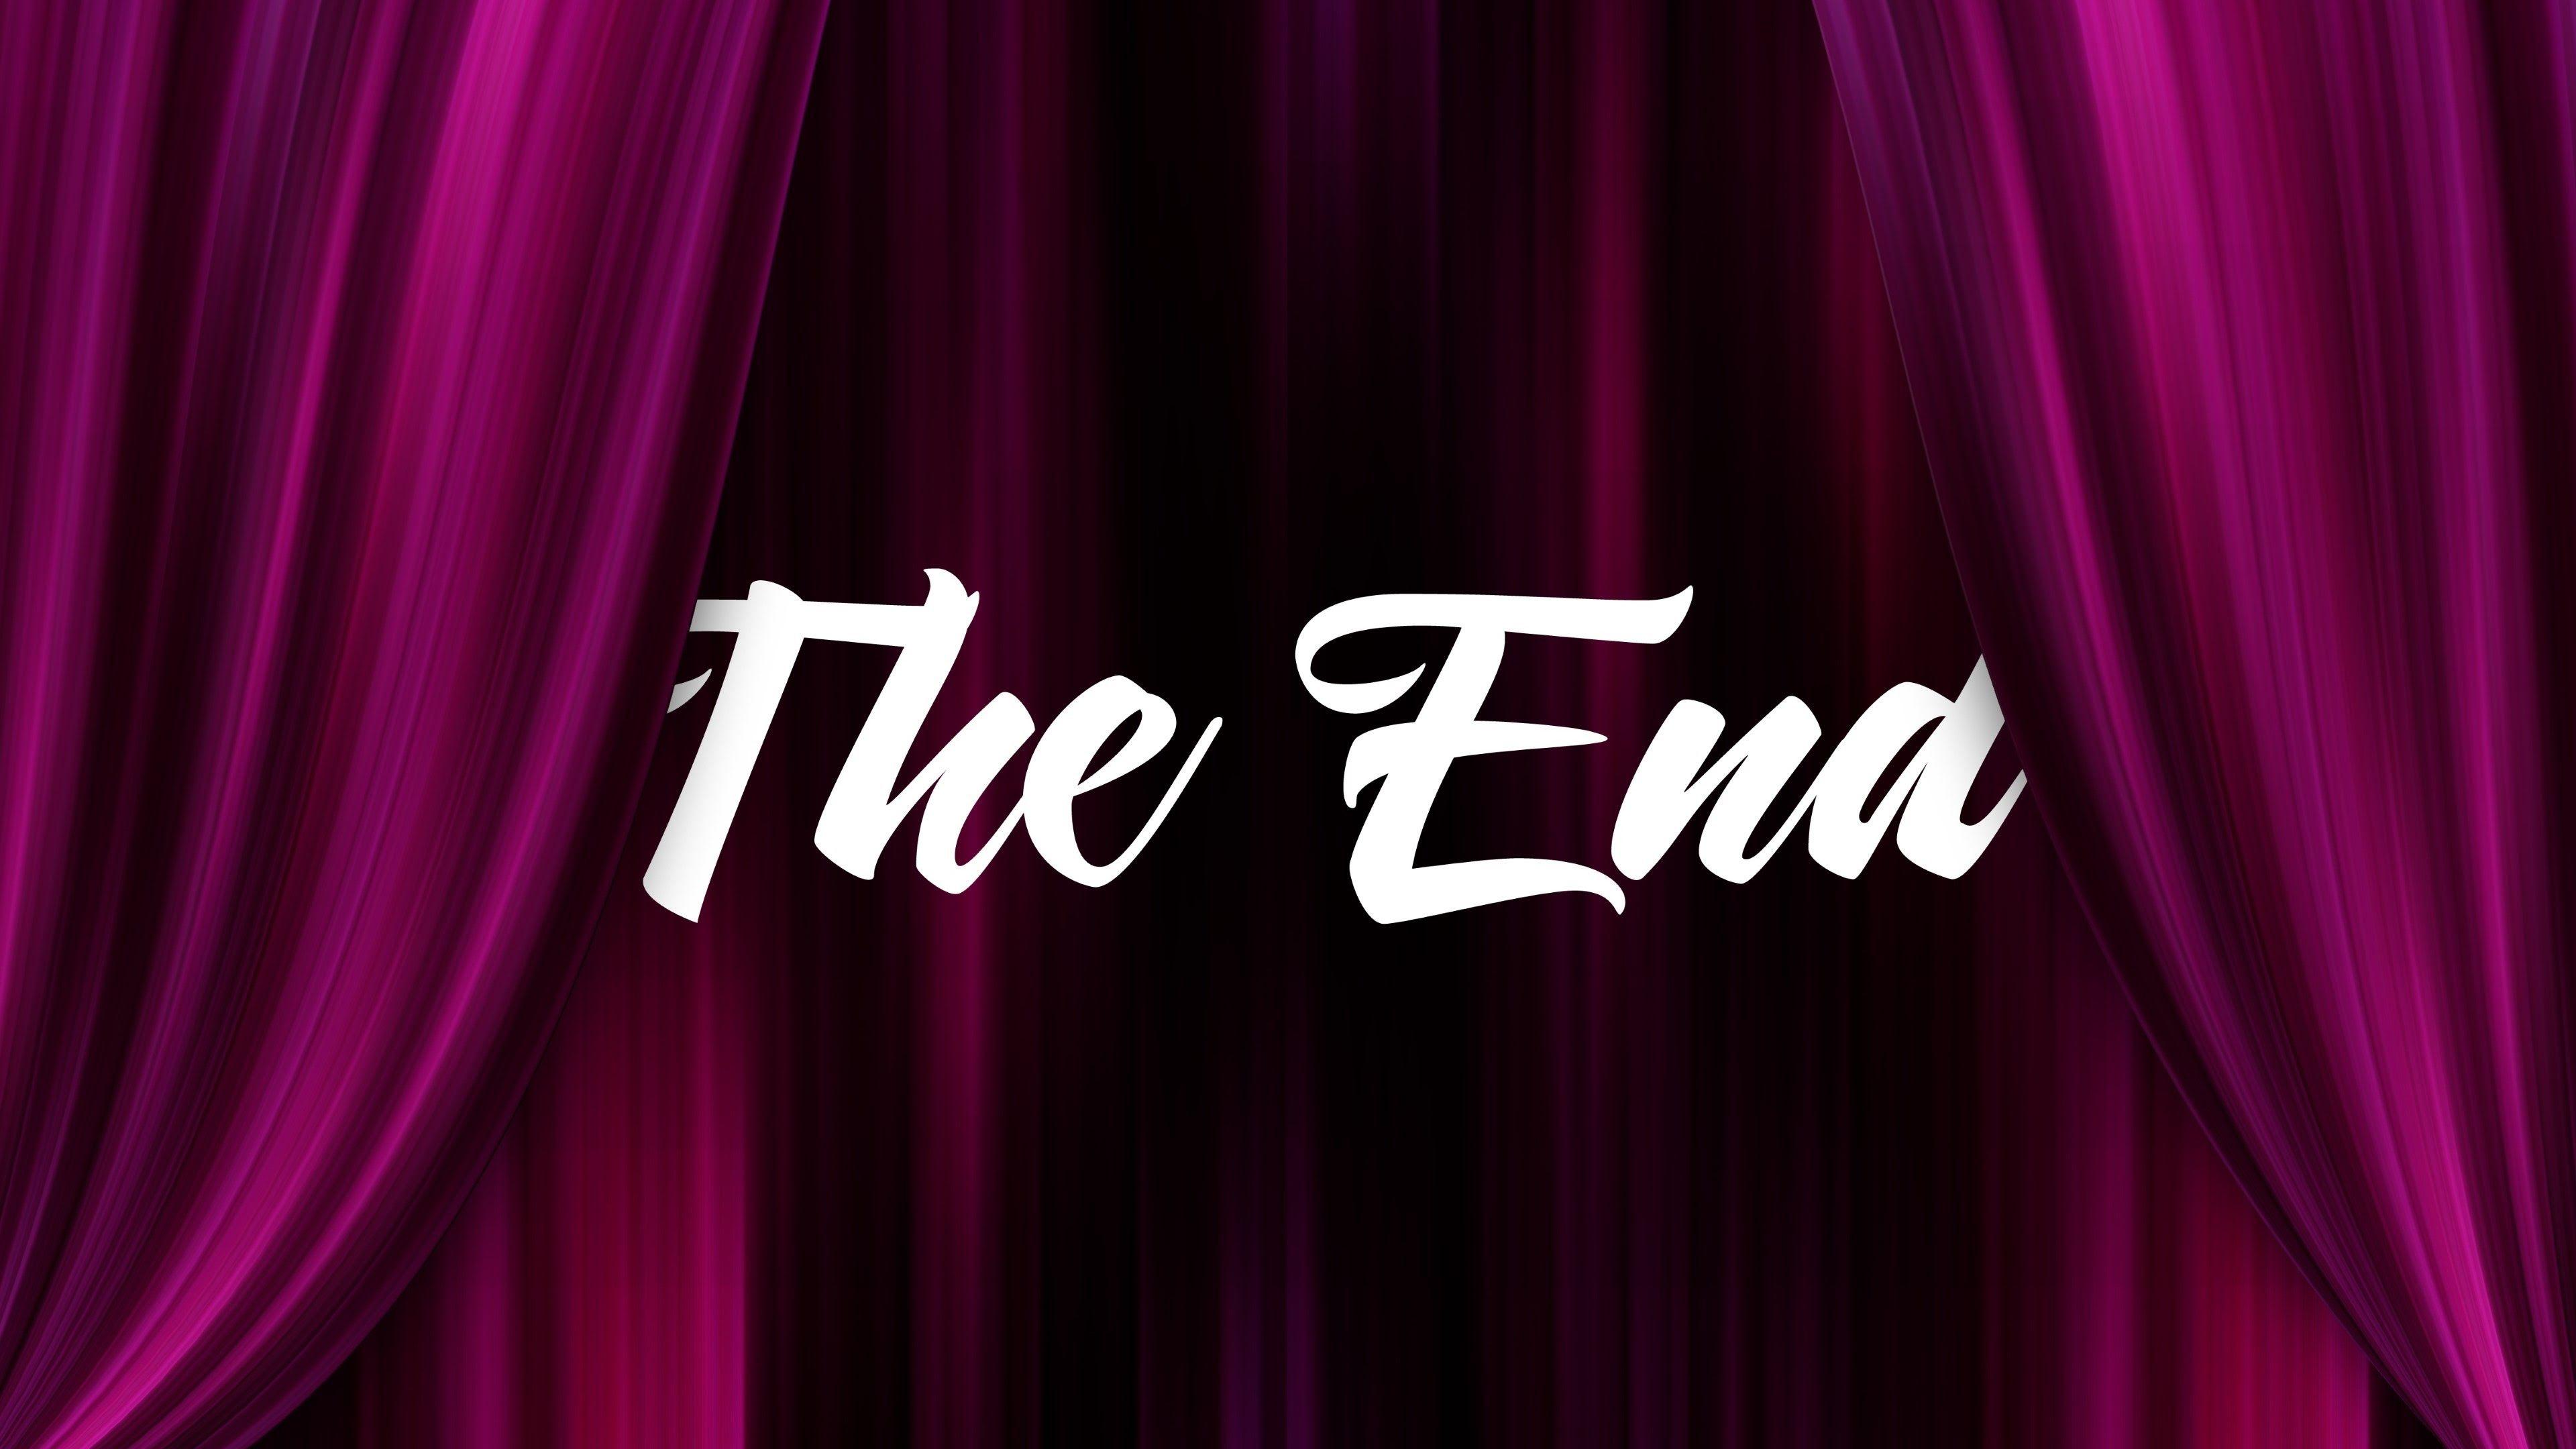 The End 4k Ultra HD Wallpaper and Background Imagex2160